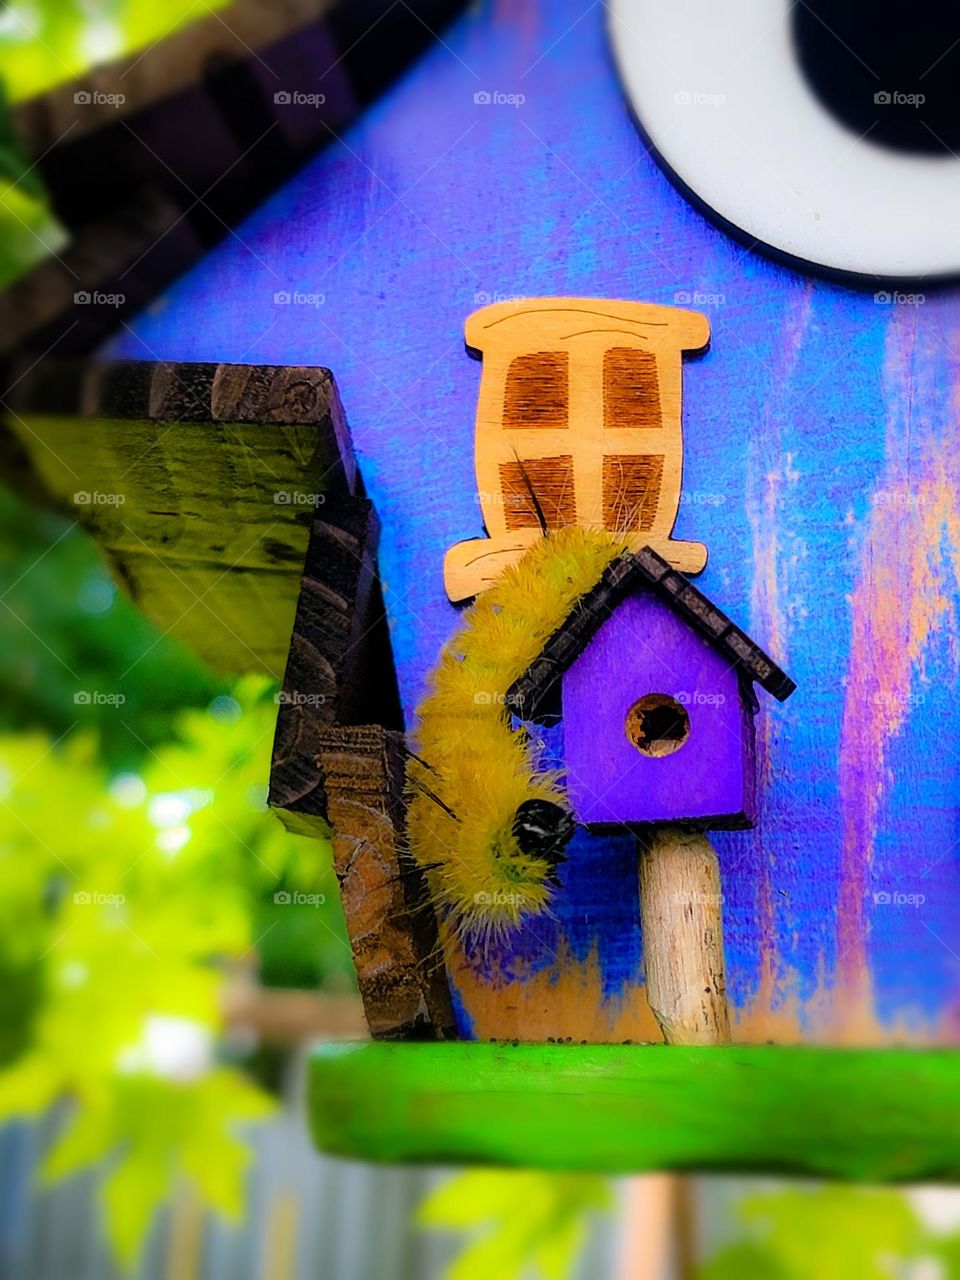 Fuzzy yellow caterpillar finding a home in a bright purple bird house.